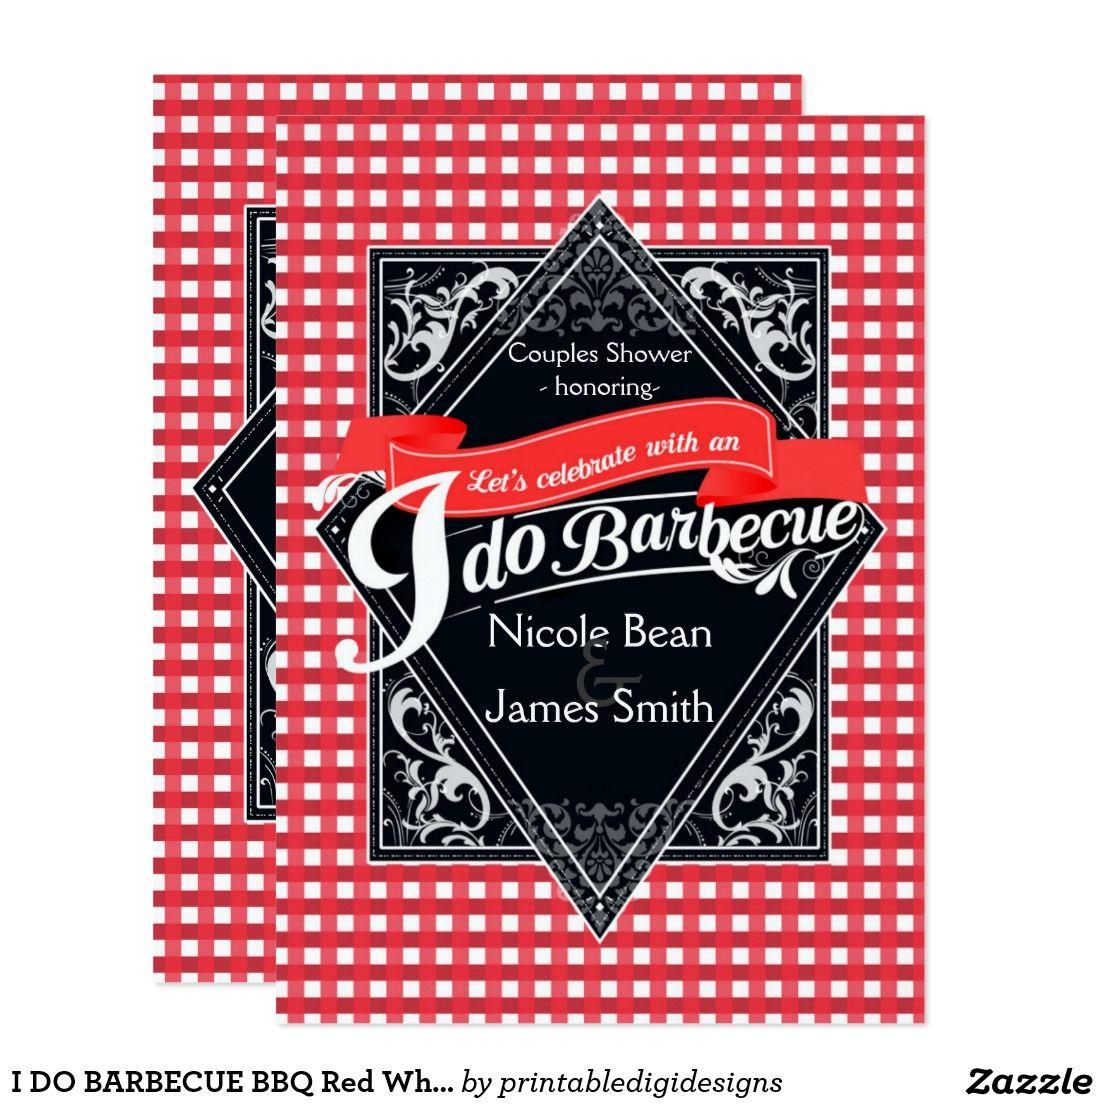 Red White Checkered Logo - I DO BARBECUE BBQ Red White Checkered Engagement Card. Engagement